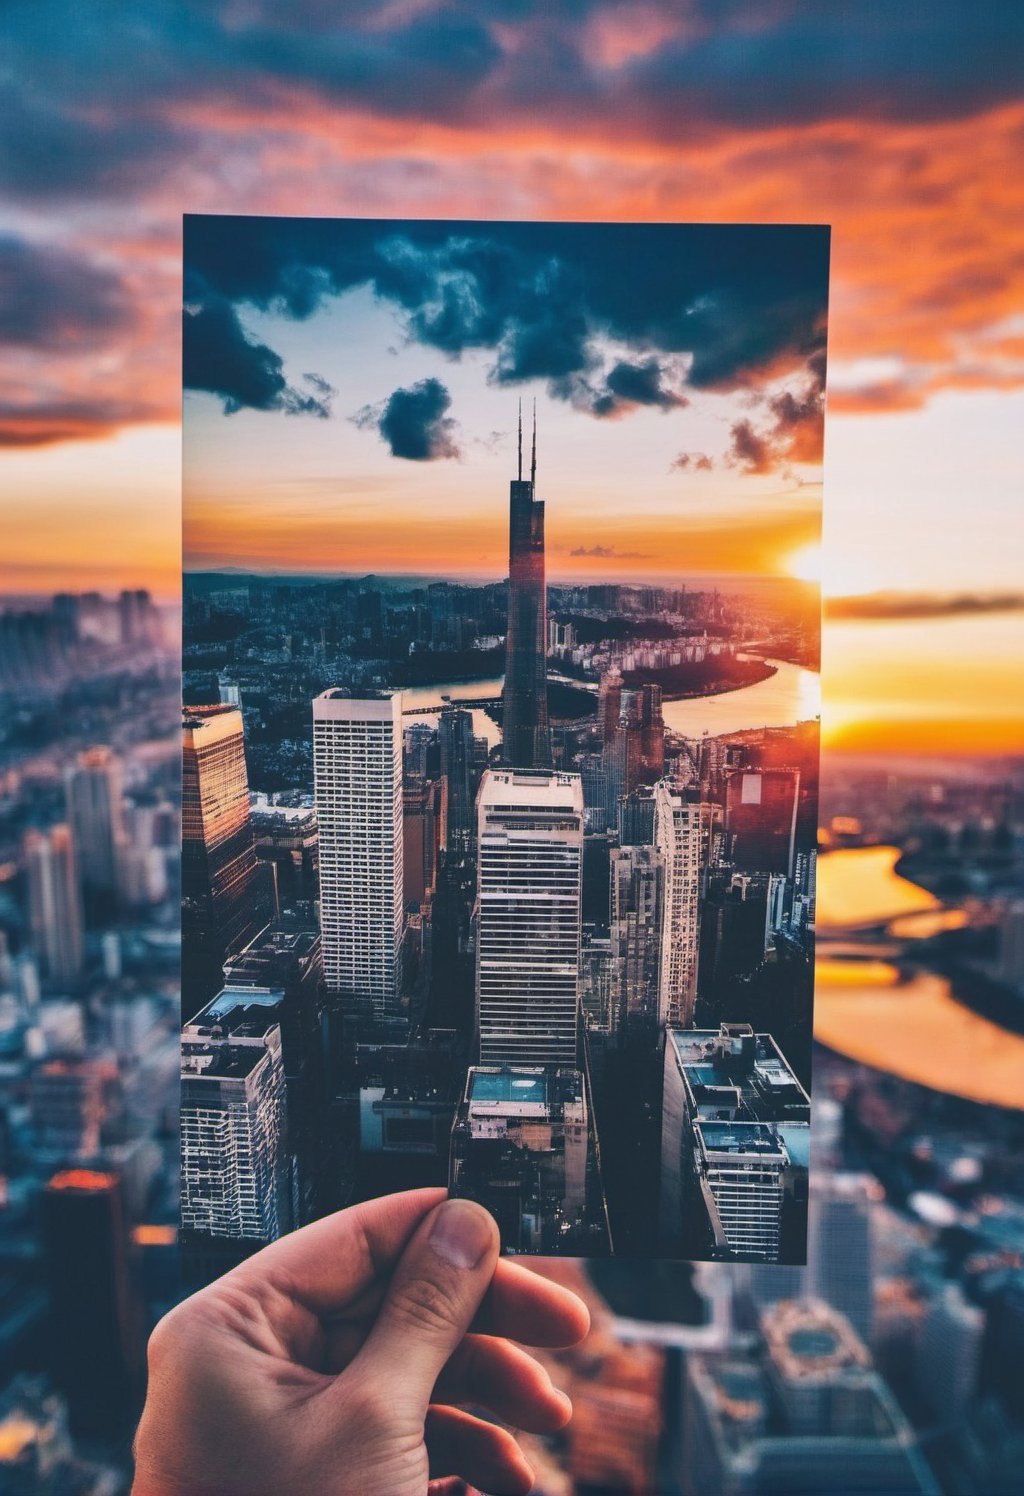 Hand,Holding a photo, the photo shows urban scenery, cityscape, city, scenery, building, sky, skyscraper, outdoors, sunset, watermark, science fiction, real world location, <lora:1998_3476_4086@775eafd423:0.8>